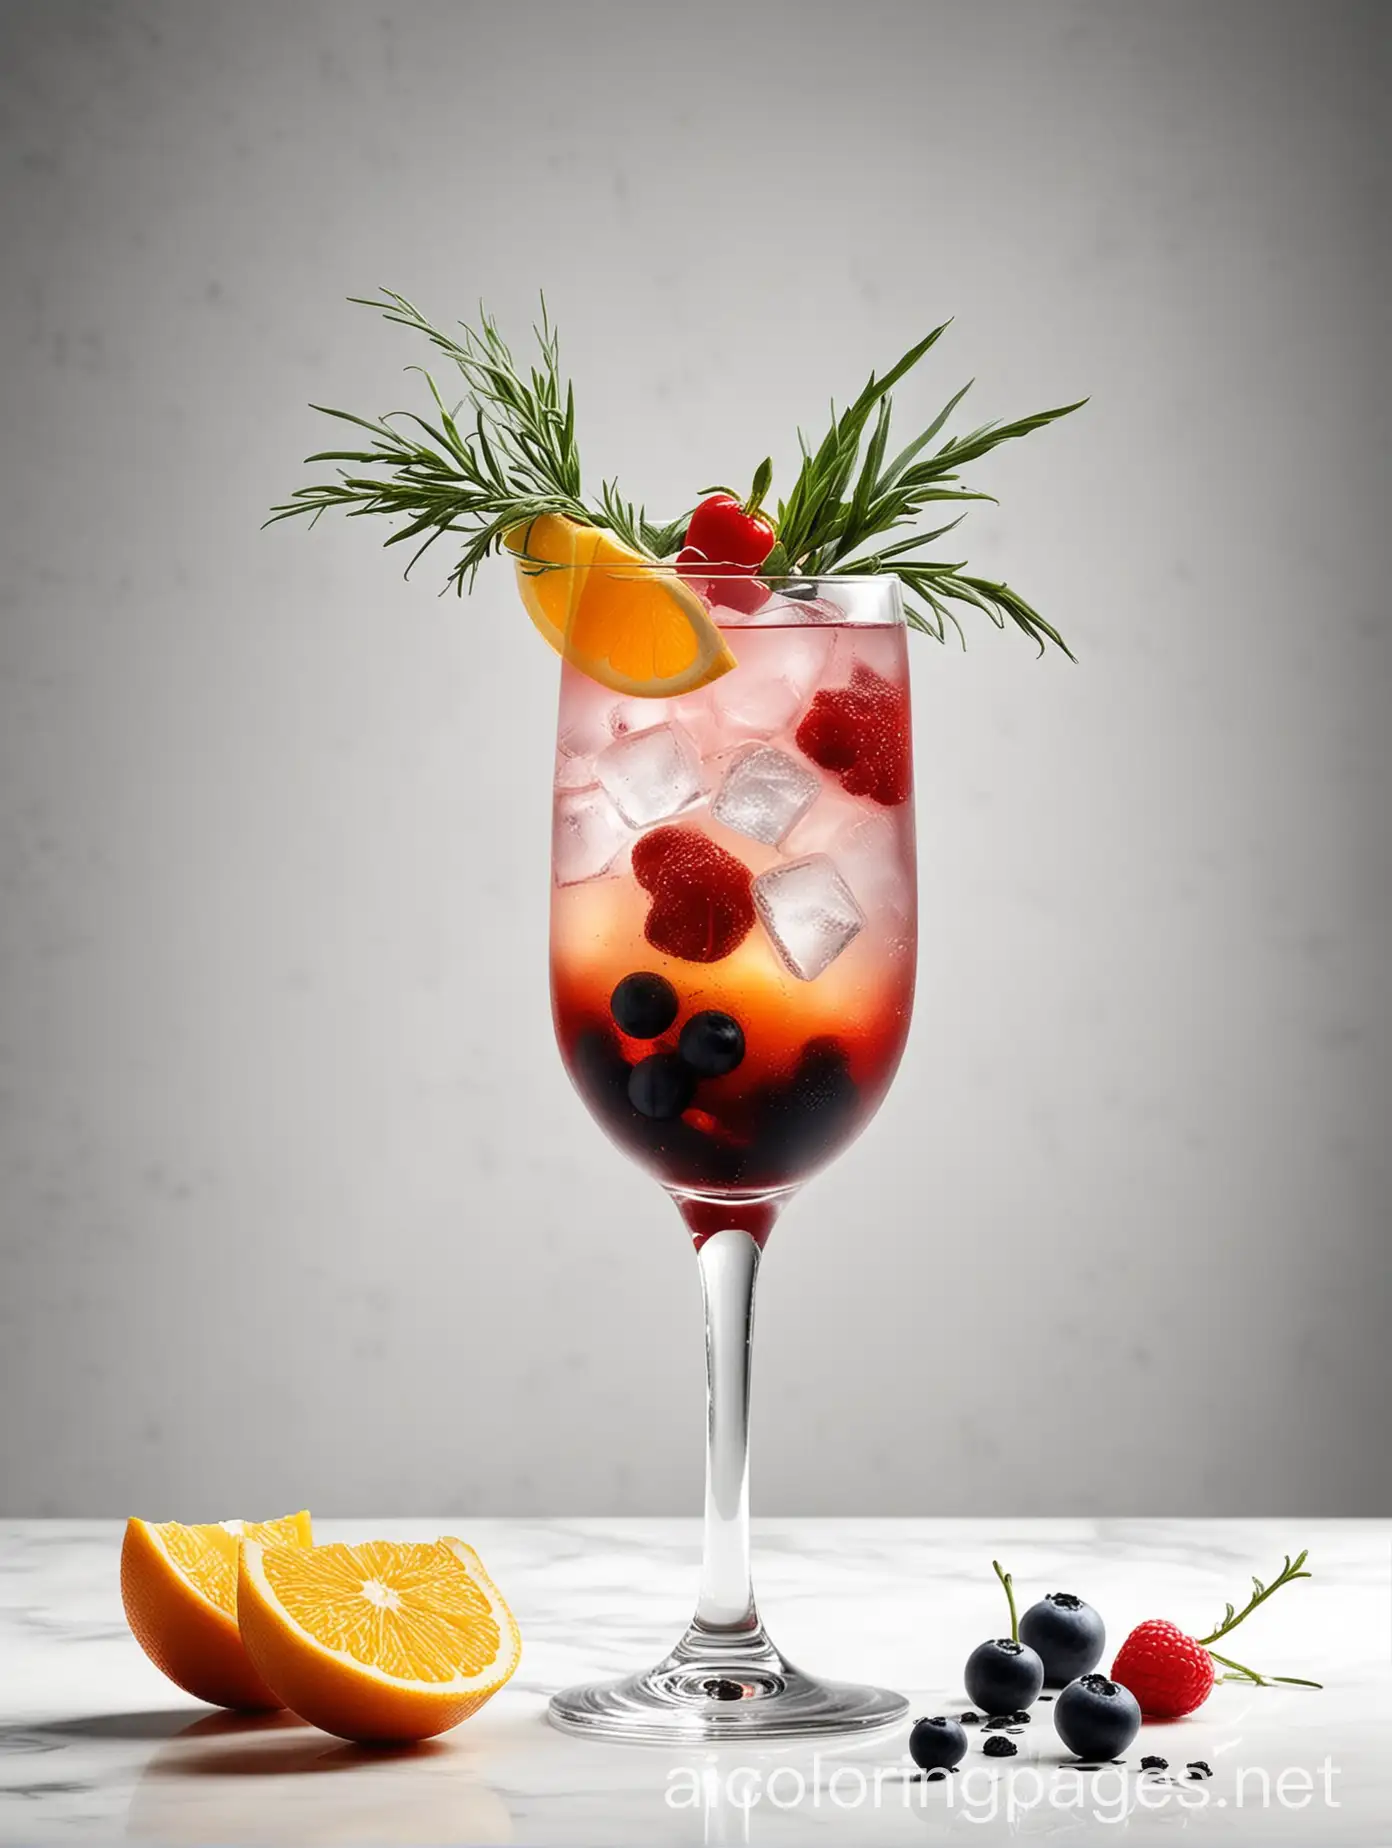 Create a visually stunning image that captures the artistry of mixology. Display a mesmerizing cocktail presentation with vibrant colors, meticulously crafted garnishes, and an ambiance that exudes sophistication. This image should inspire viewers to appreciate the creativity and craftsmanship behind mixology, Coloring Page, black and white, line art, white background, Simplicity, Ample White Space.